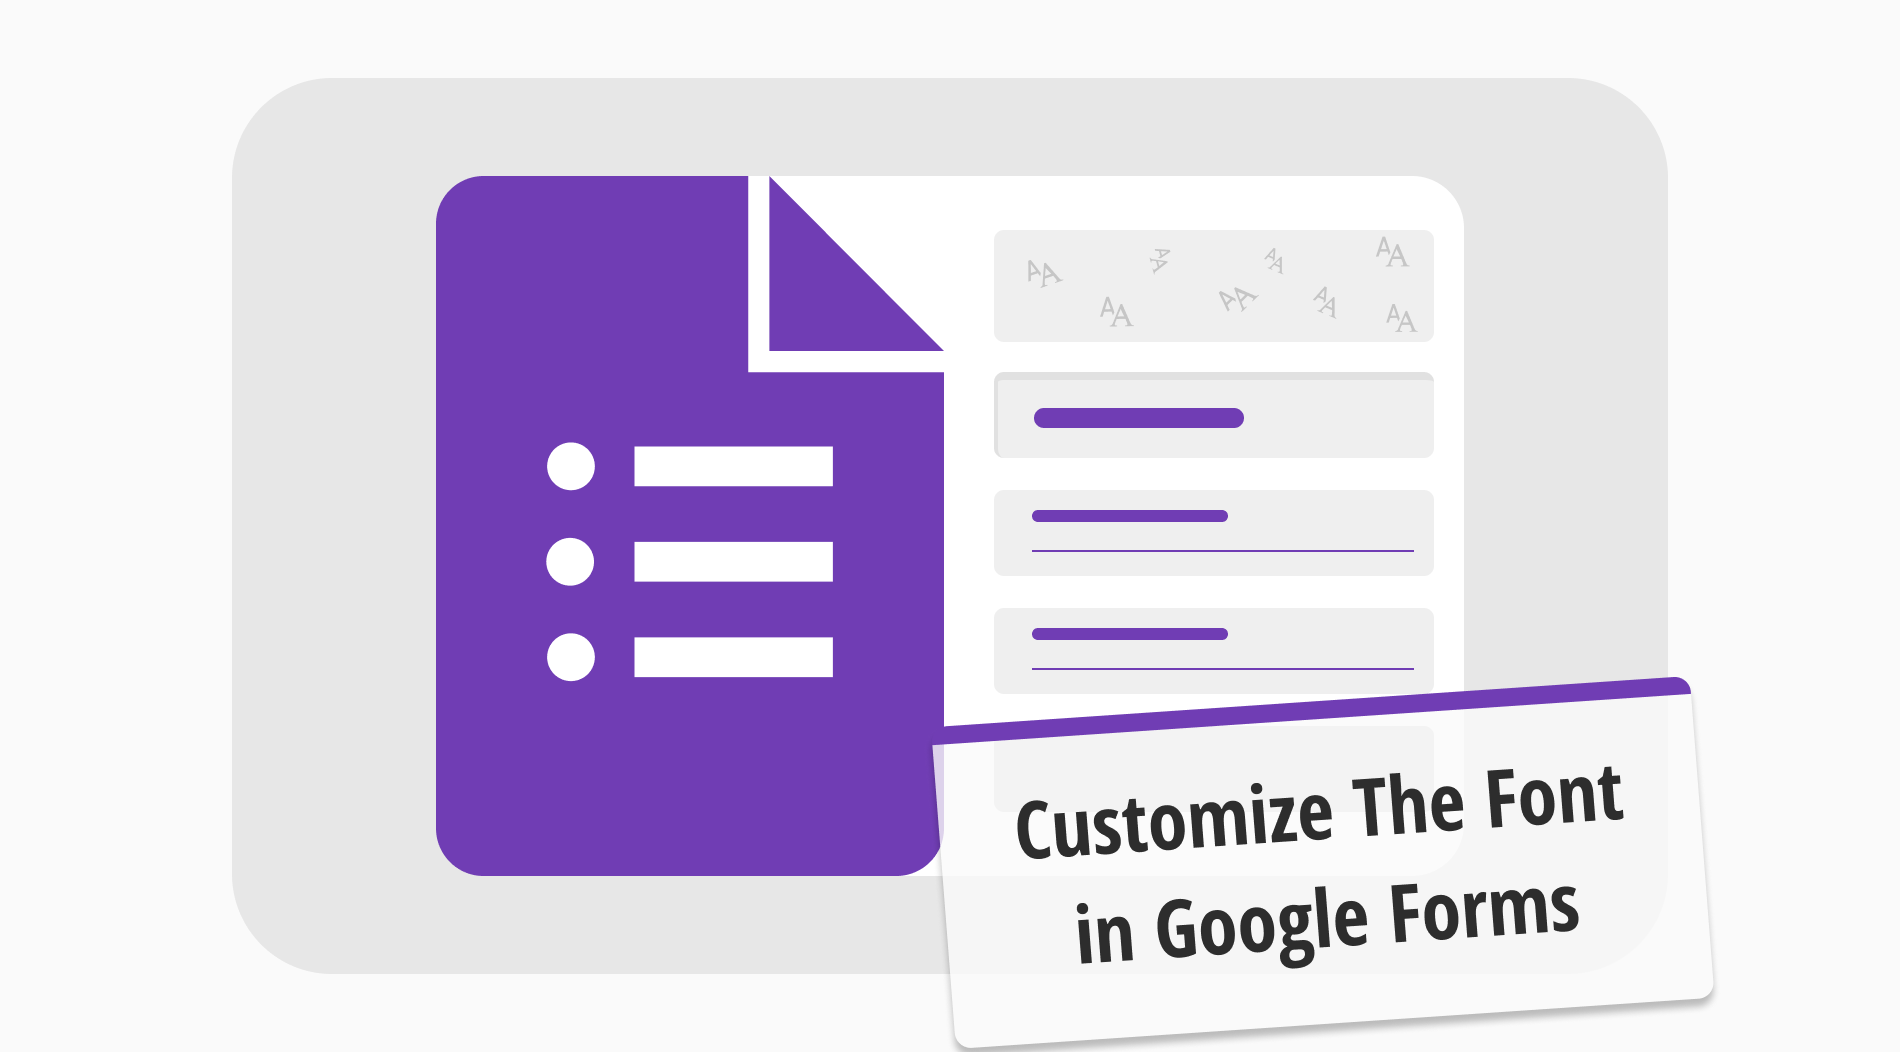 How to customize the font in Google Forms